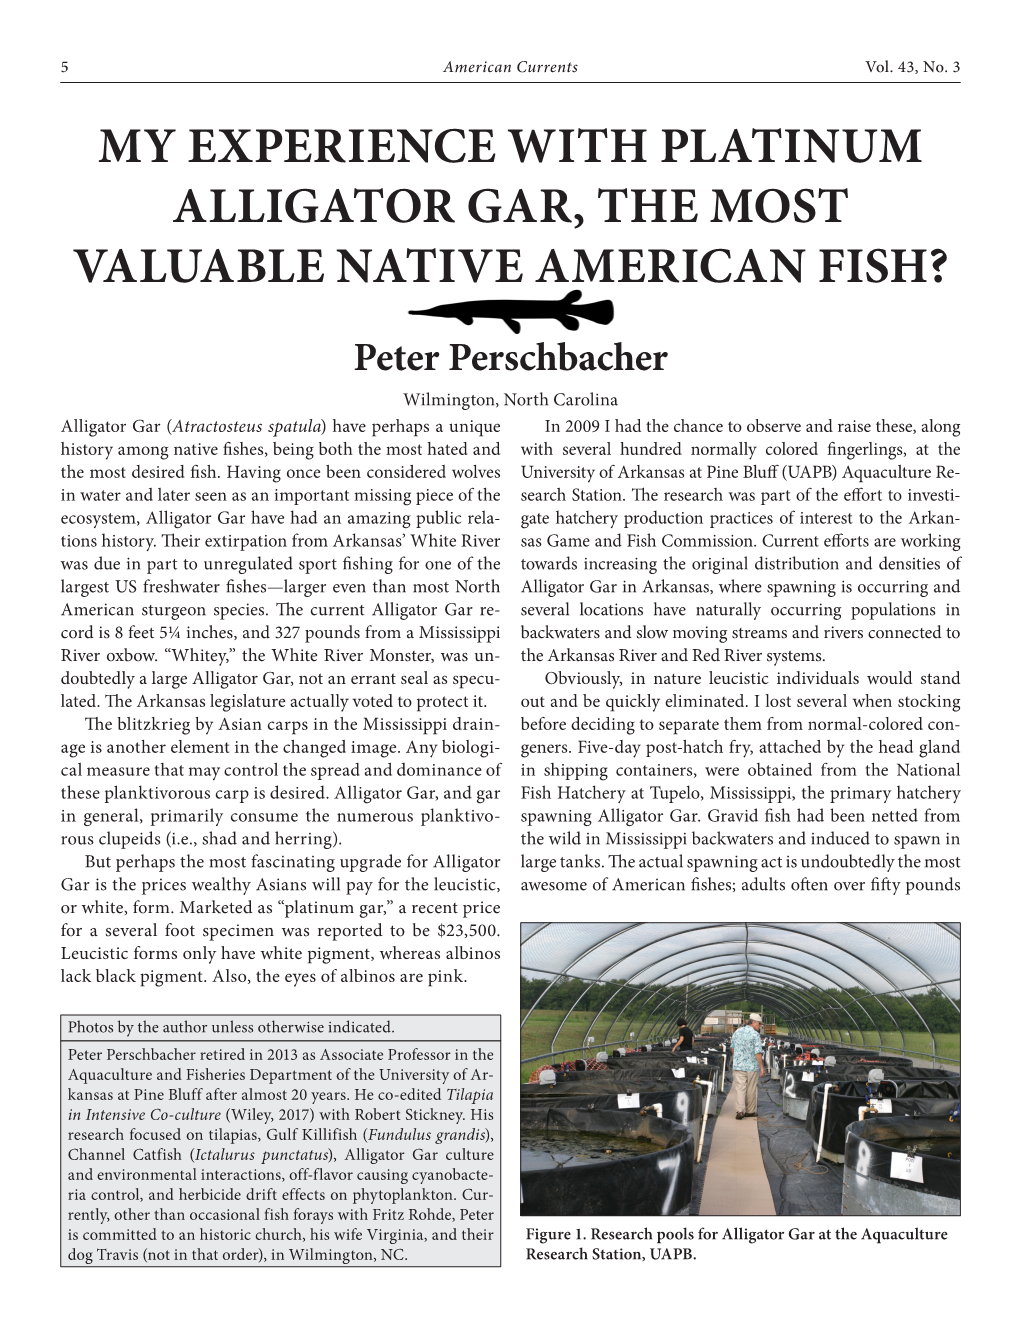 My Experience with Platinum Alligator Gar, the Most Valuable Native American Fish? Peter Perschbacher